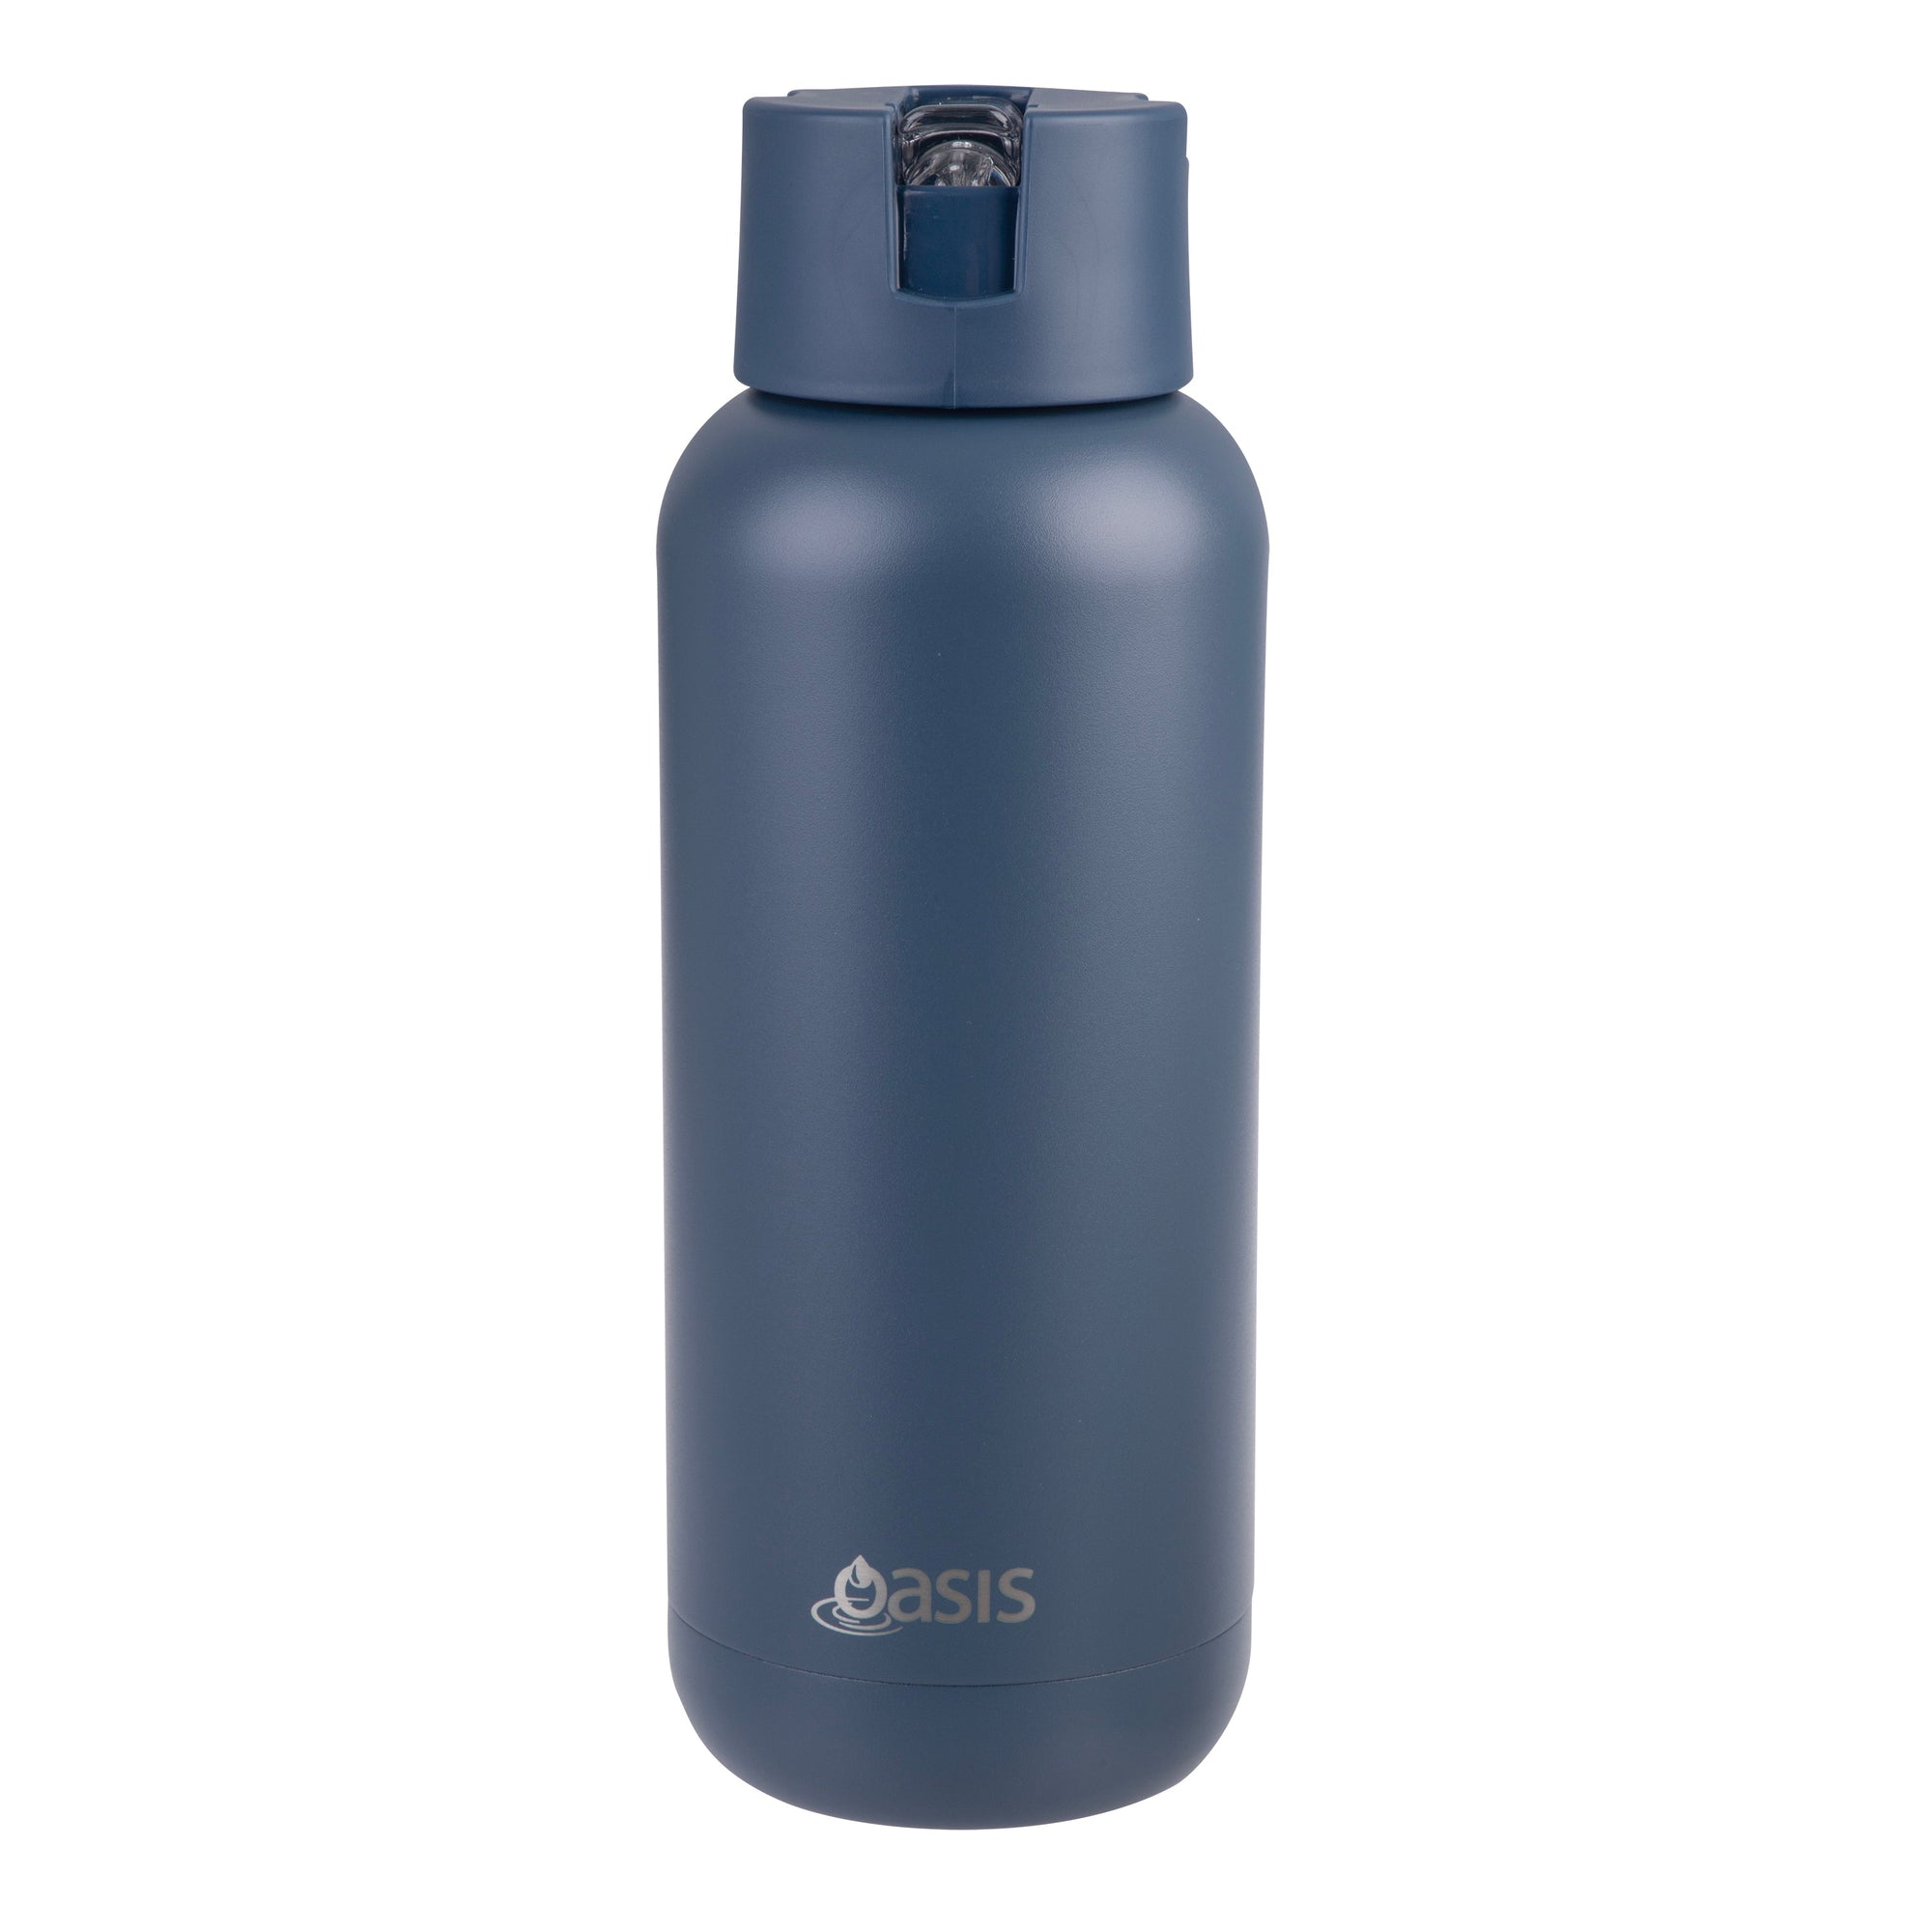 Moda 1L Ceramic Lined Insulated Water Bottle - Indigo - LIFESTYLE - Water Bottles - Soko and Co